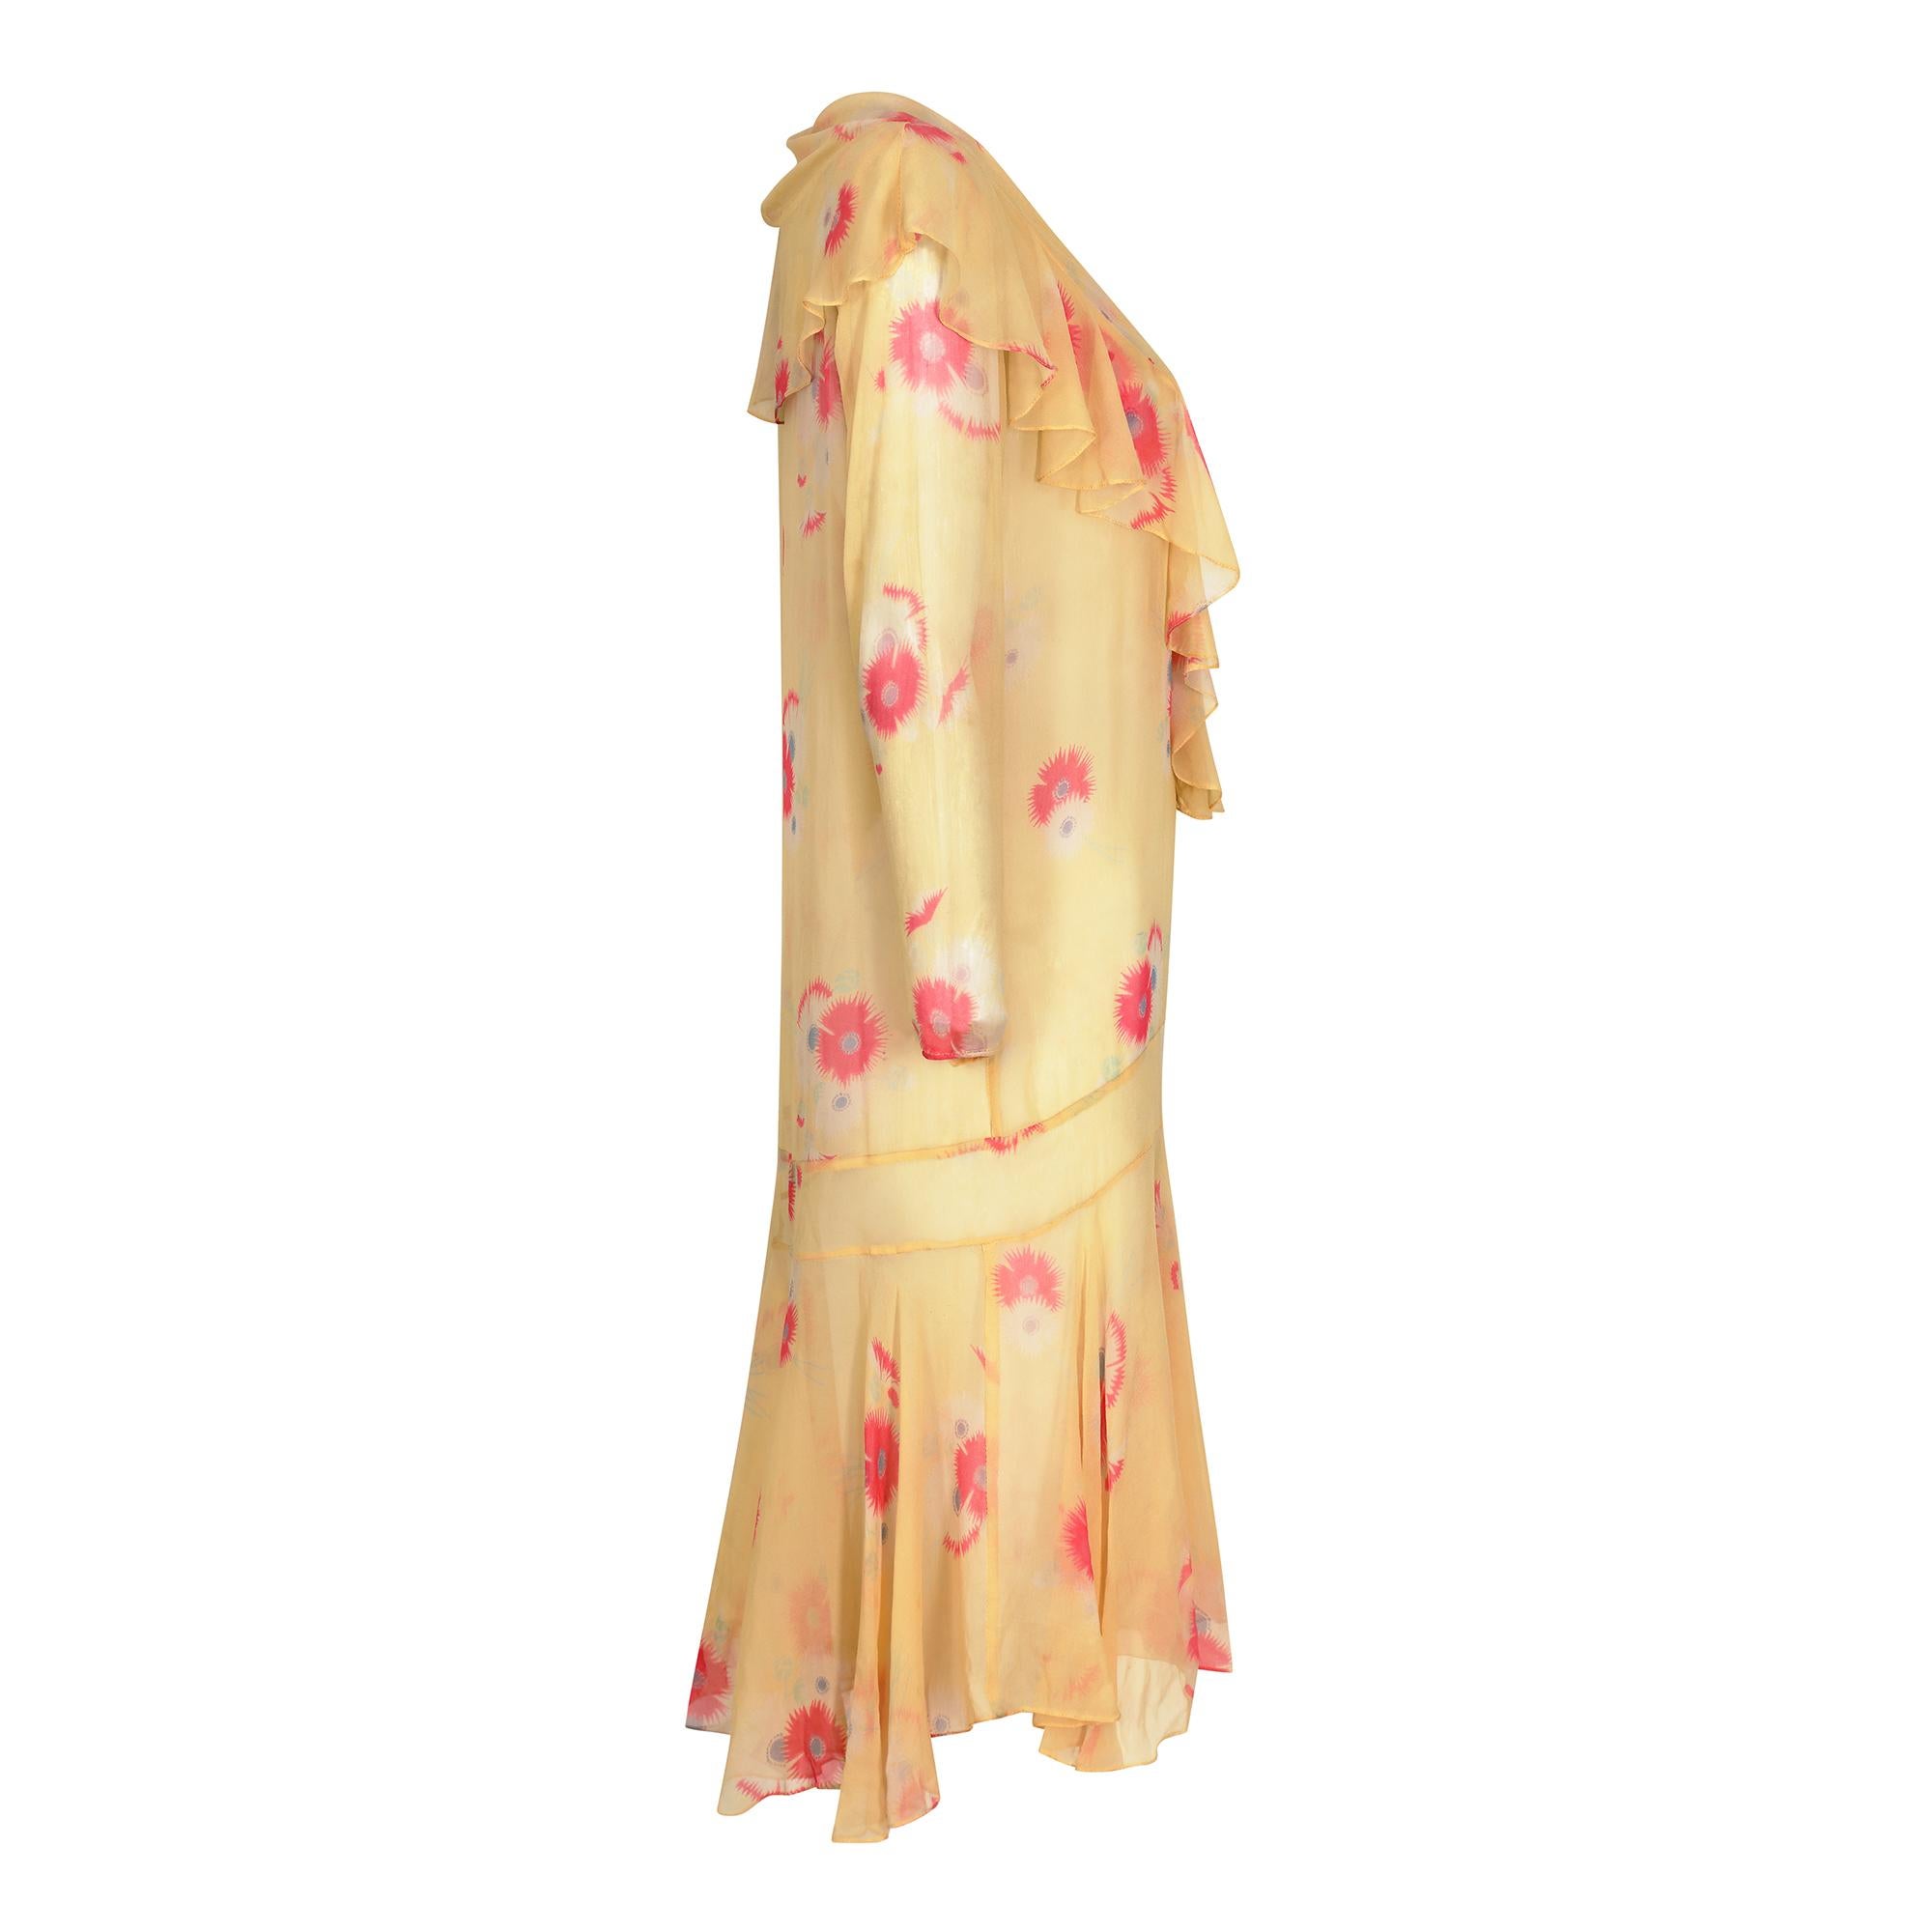 This charming original 1920s silk chiffon floral print dress is delicate, feminine and in excellent antique condition. The pale yellow chiffon hosts a subtle abstract floral design in deep rose pink and lilac blues and has an air of understated